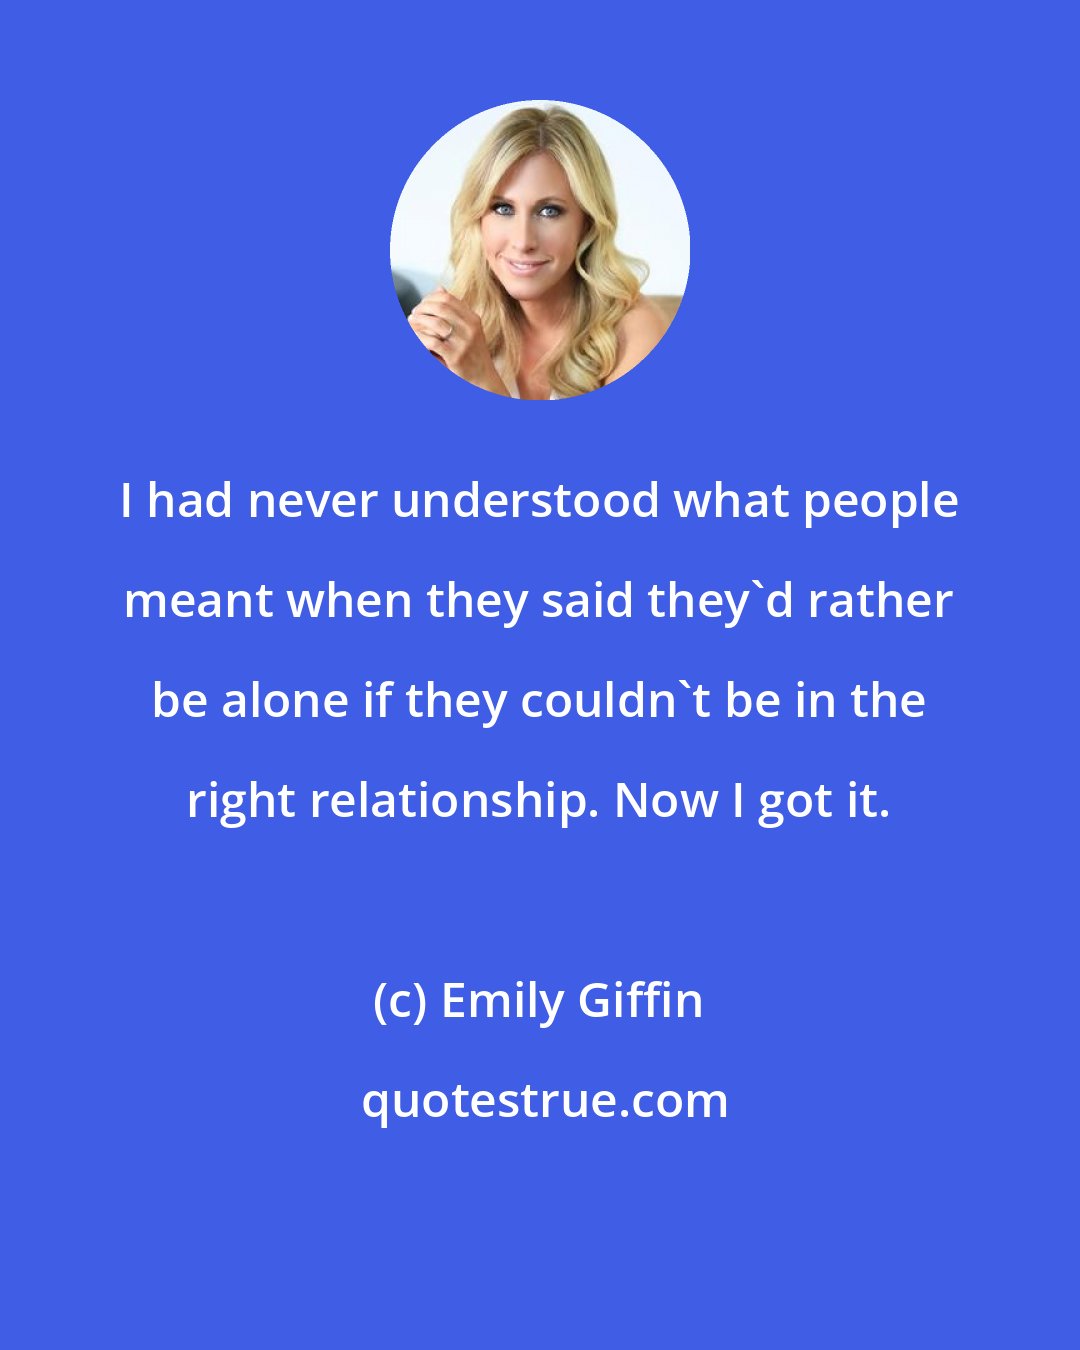 Emily Giffin: I had never understood what people meant when they said they'd rather be alone if they couldn't be in the right relationship. Now I got it.